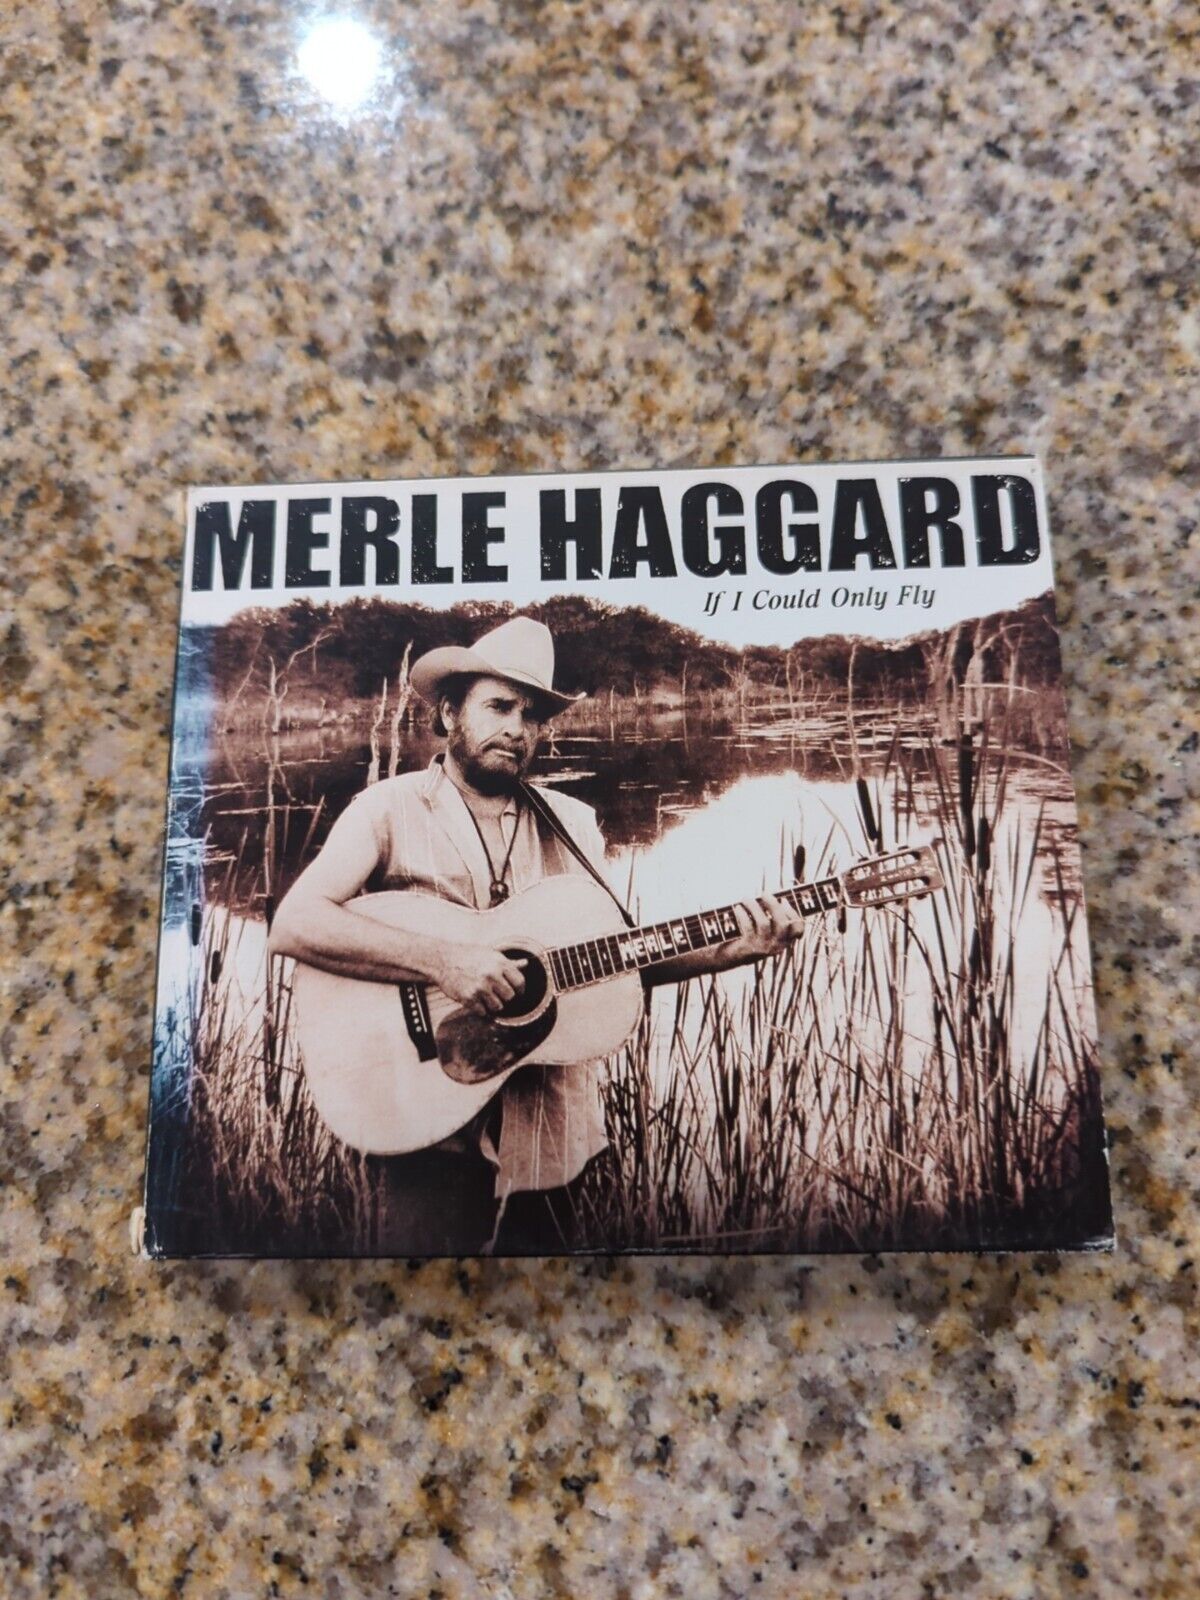 2 Merle Haggard Cd\'s - 16 Biggest Hits, If I could Only Fly